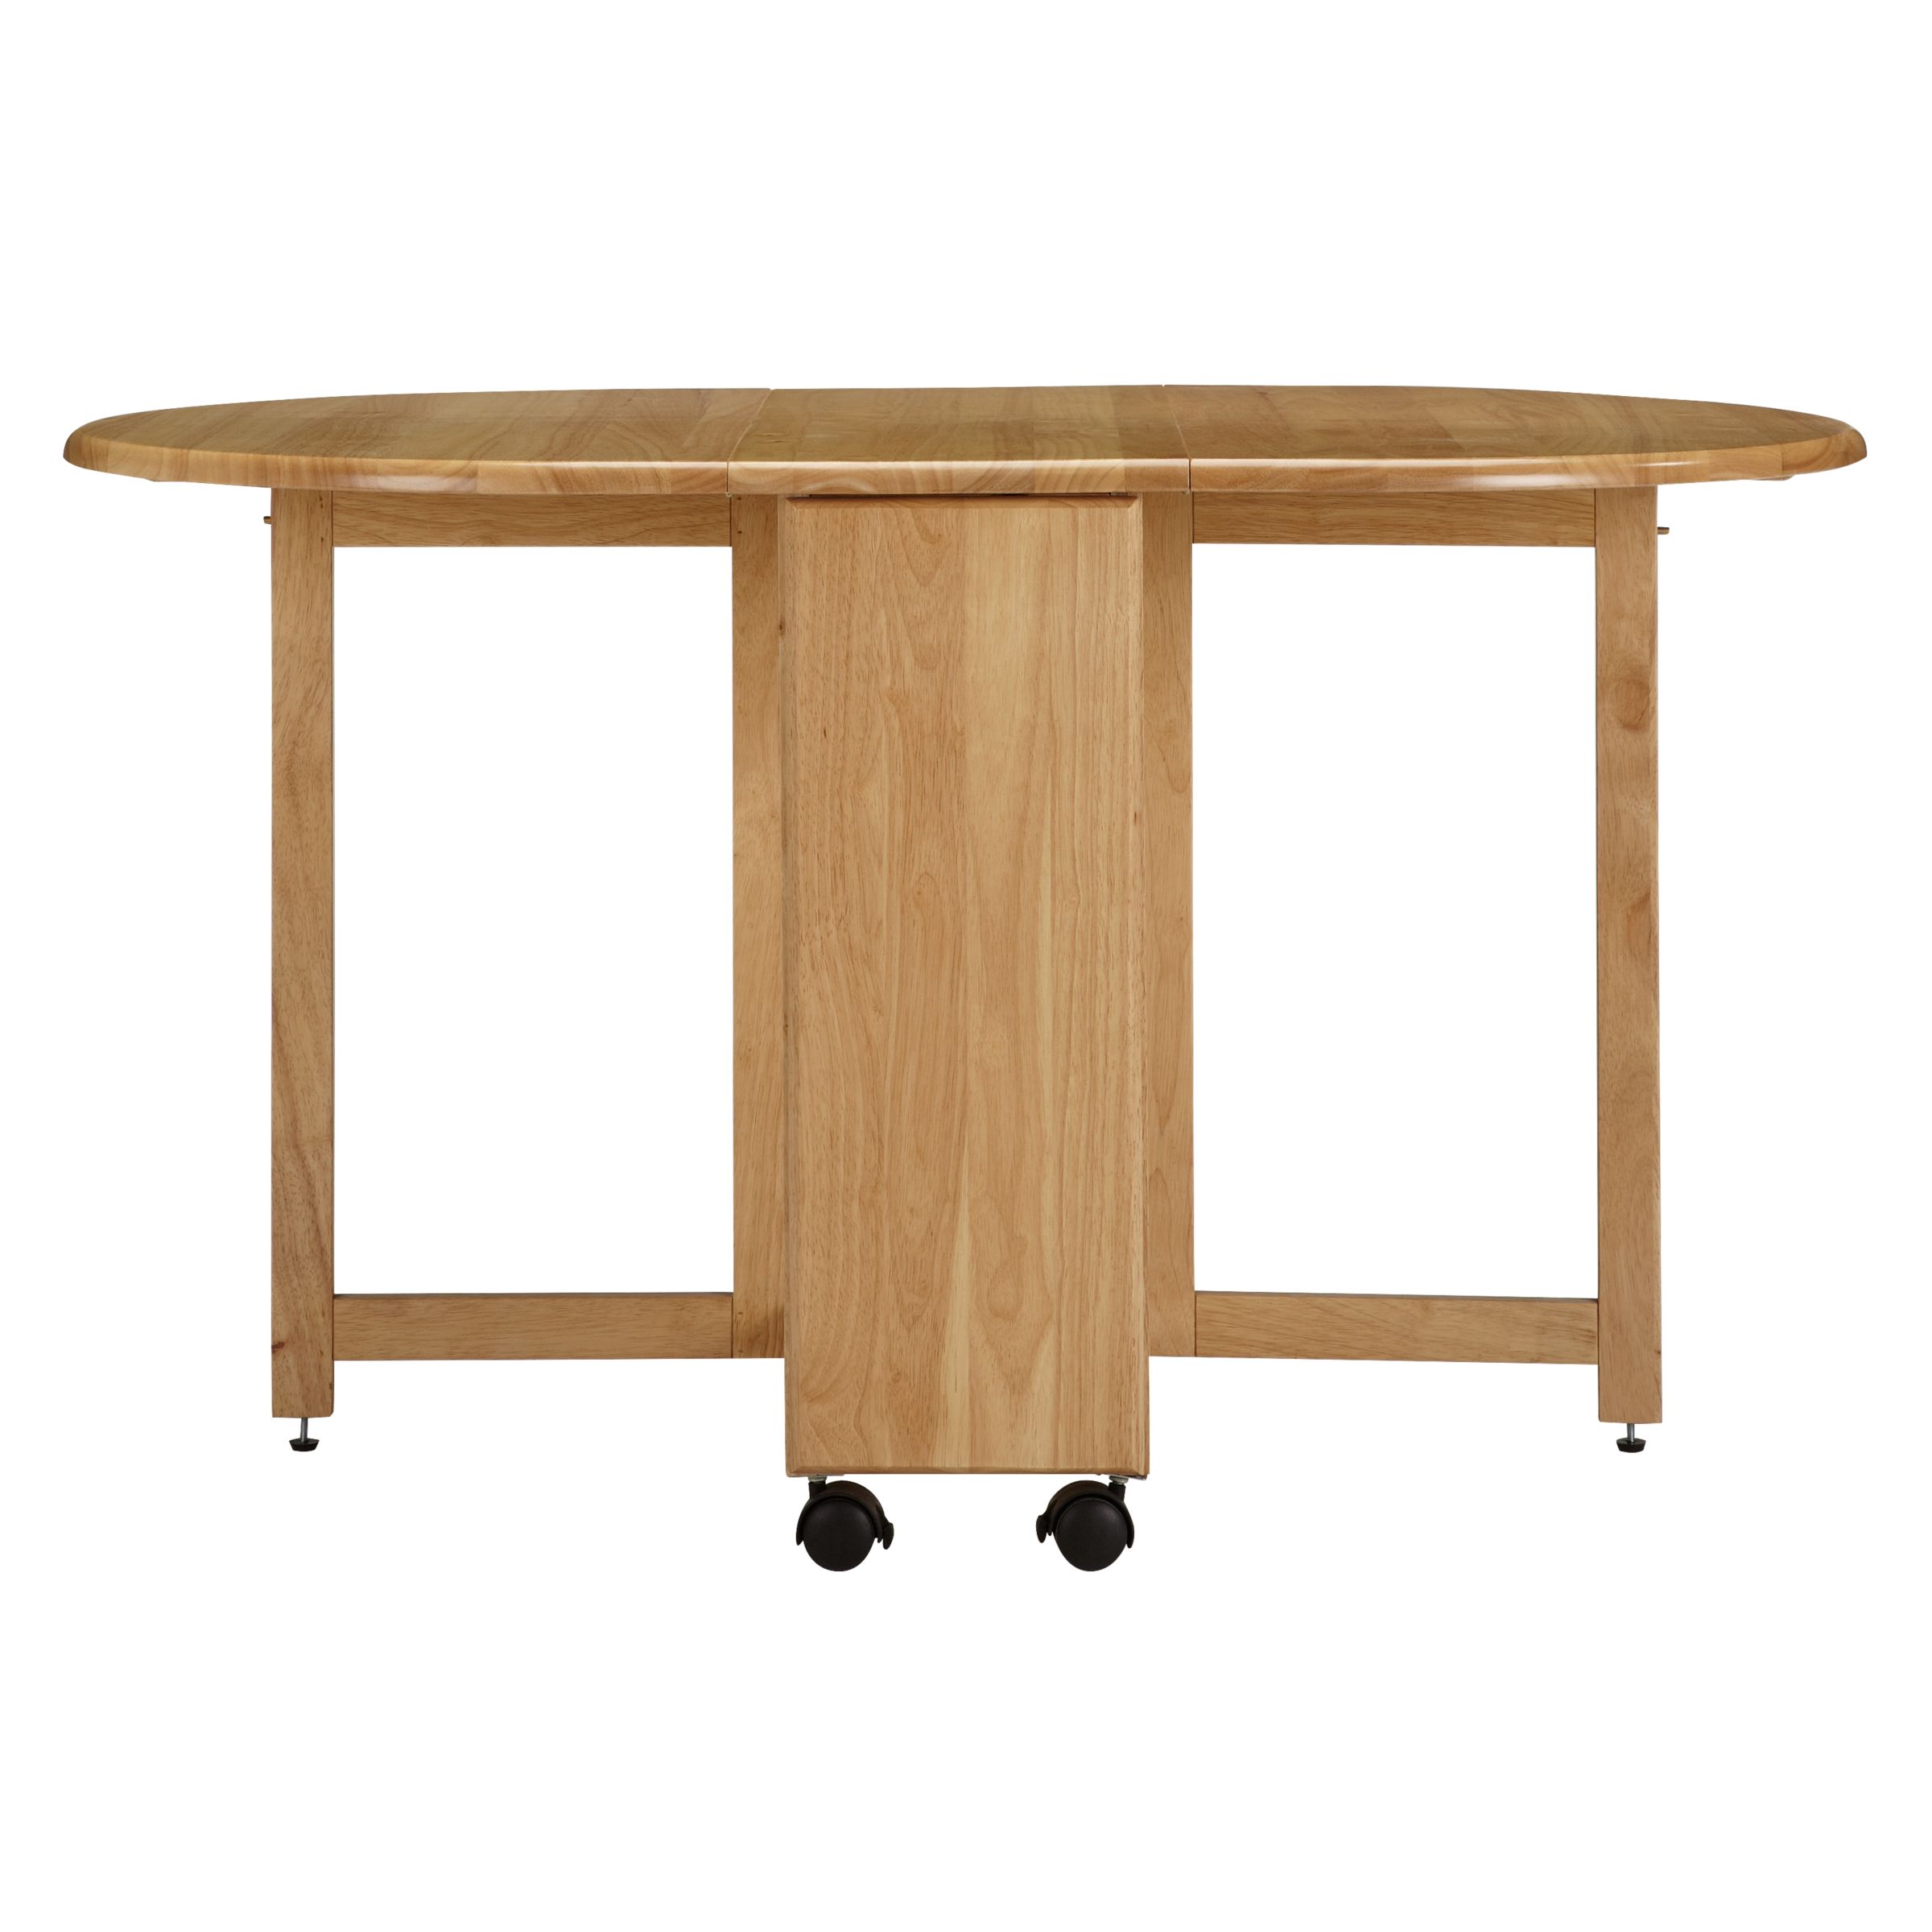 John Lewis & Partners Butterfly Drop Leaf Folding Dining Table and Four ...